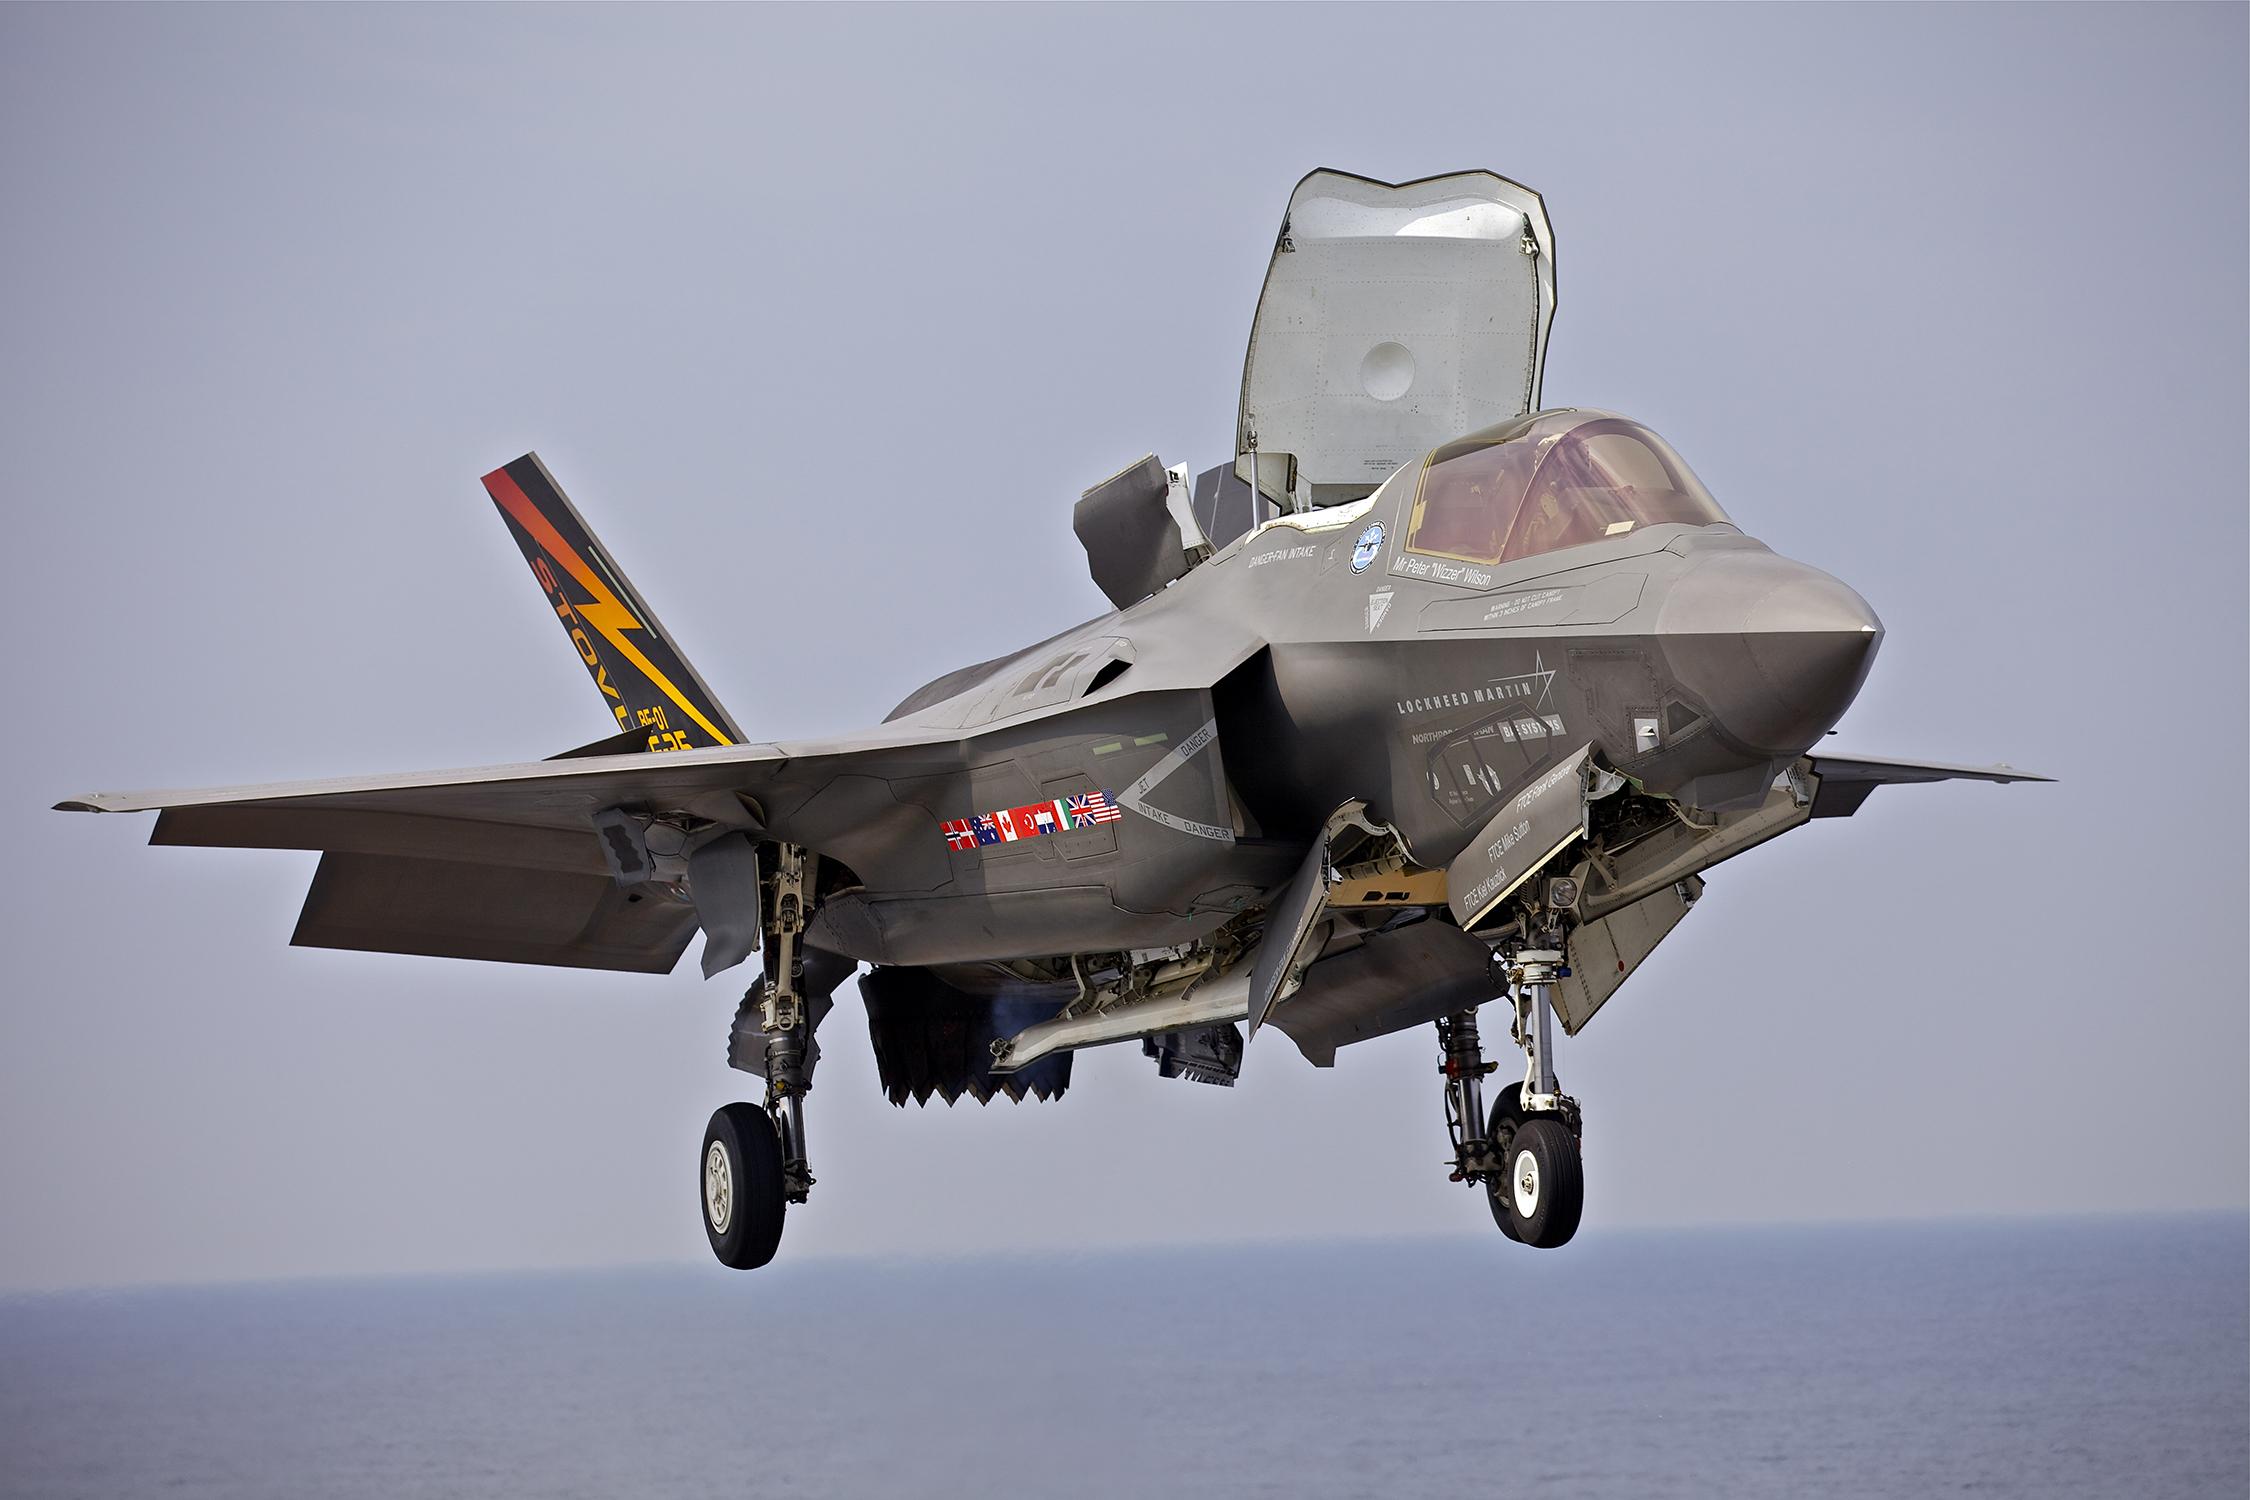 MPC Presents: A Poster Documentary Of The Lockheed Martin F 35